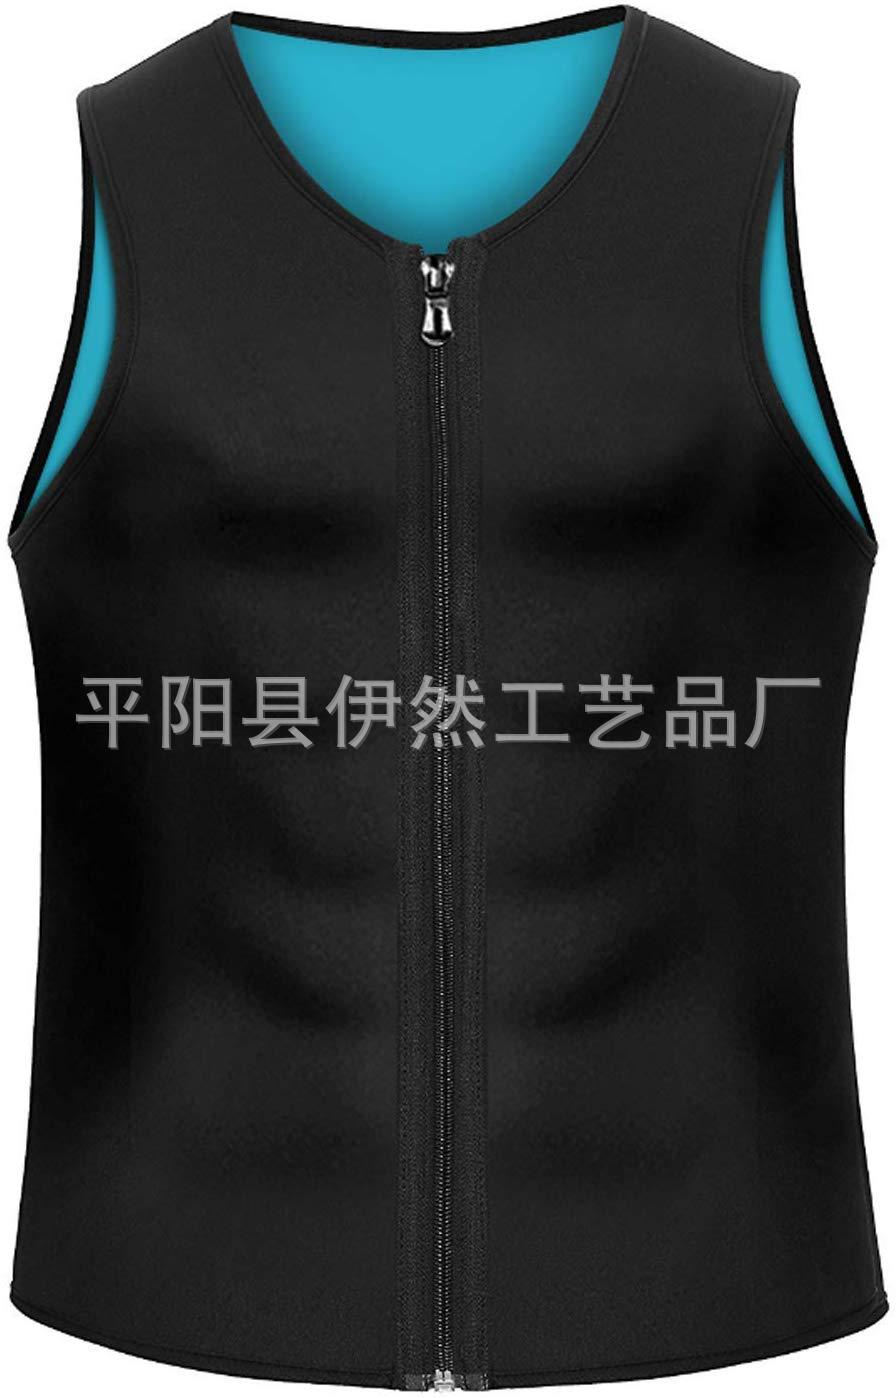 European and American Large Size Belly and Waist Shaping Men's Zipper Vest Corset Burst into Sweat Workout Clothes Neoprene Corset